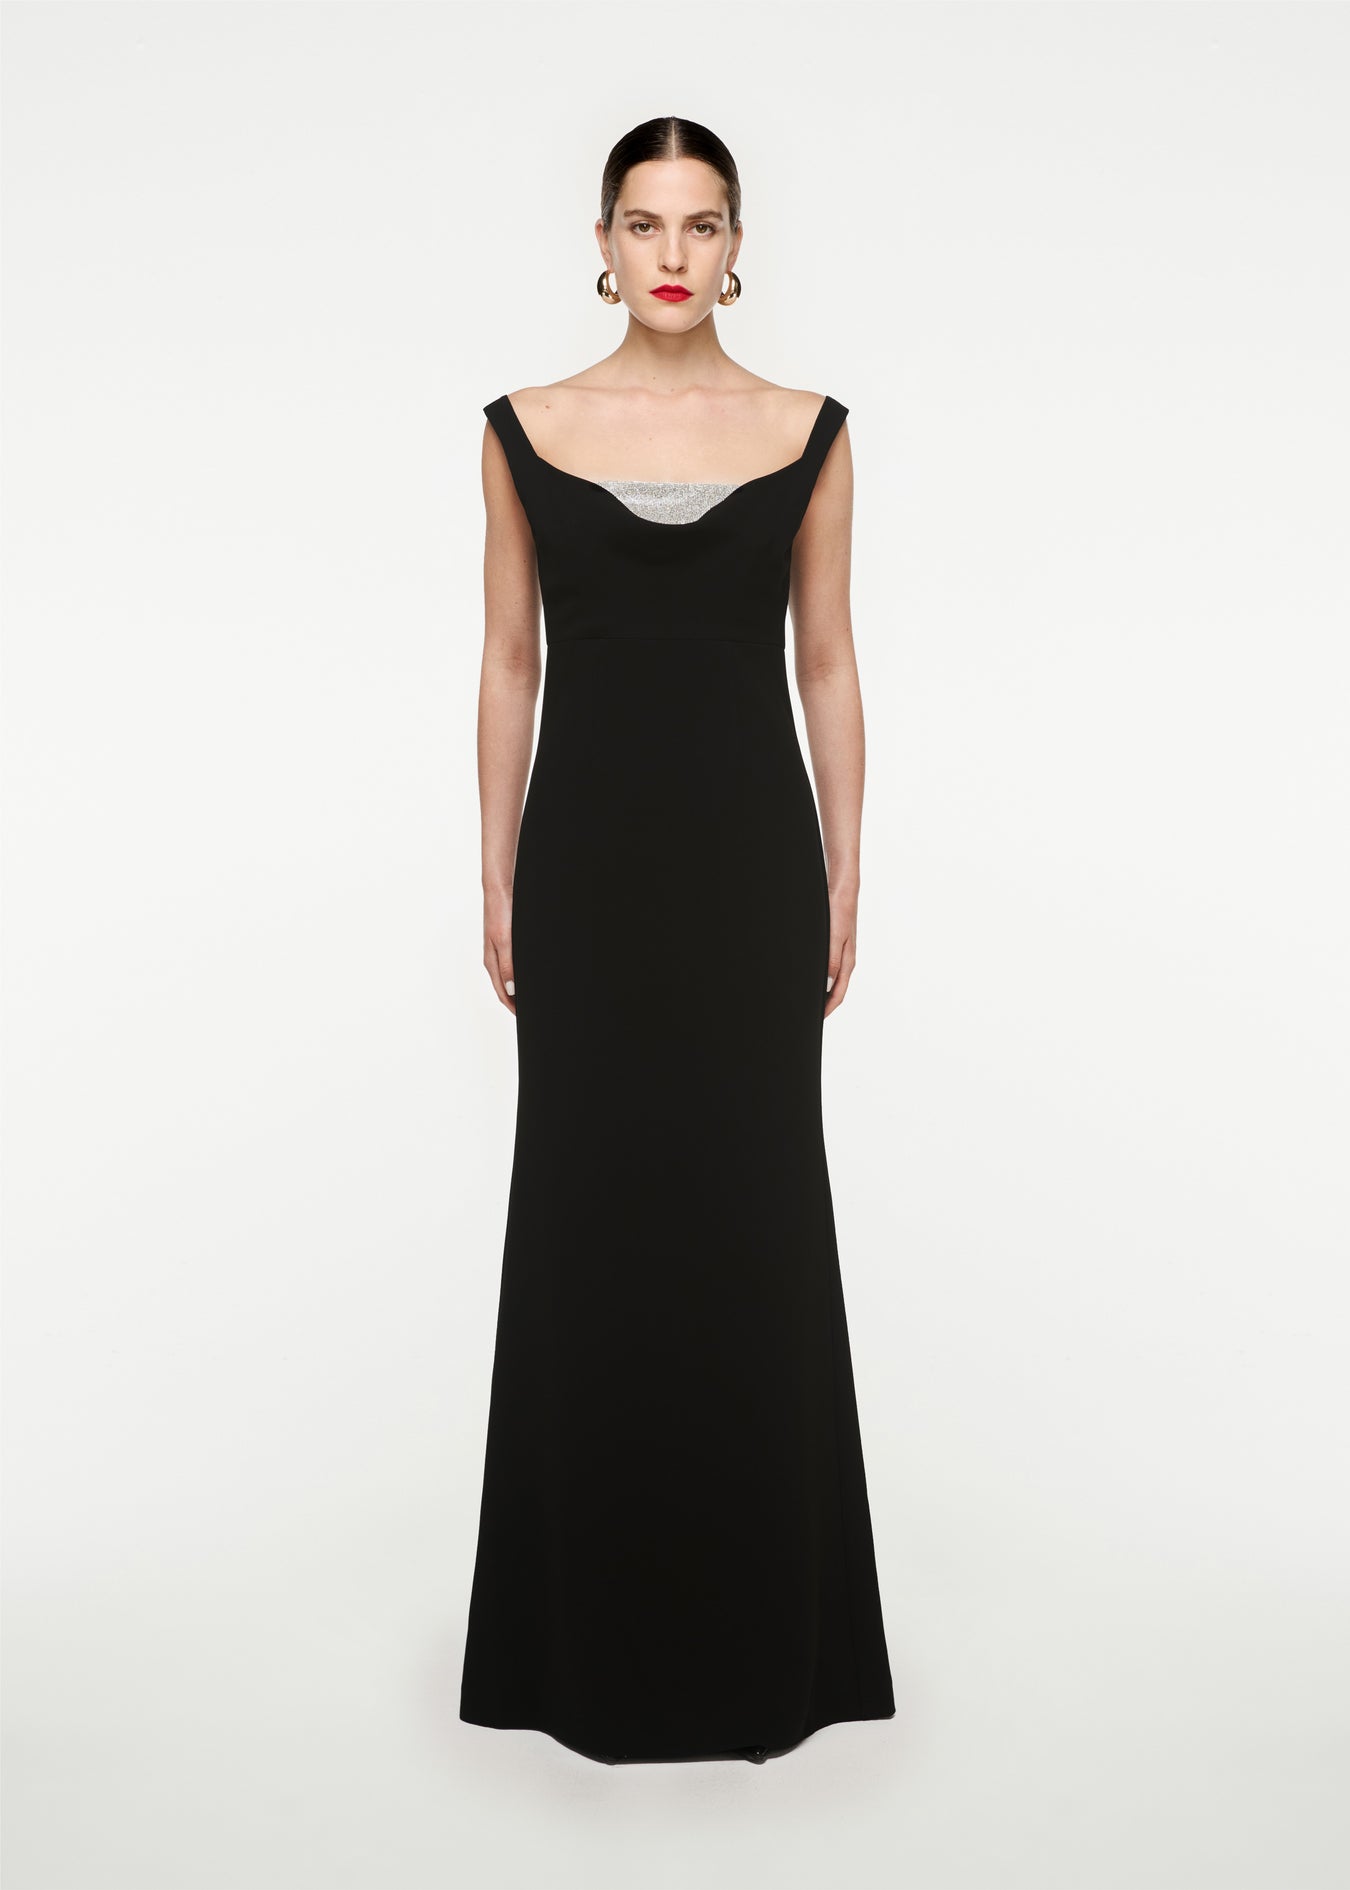 Woman wearing the Off Shoulder Cady Diamante Gown in Black